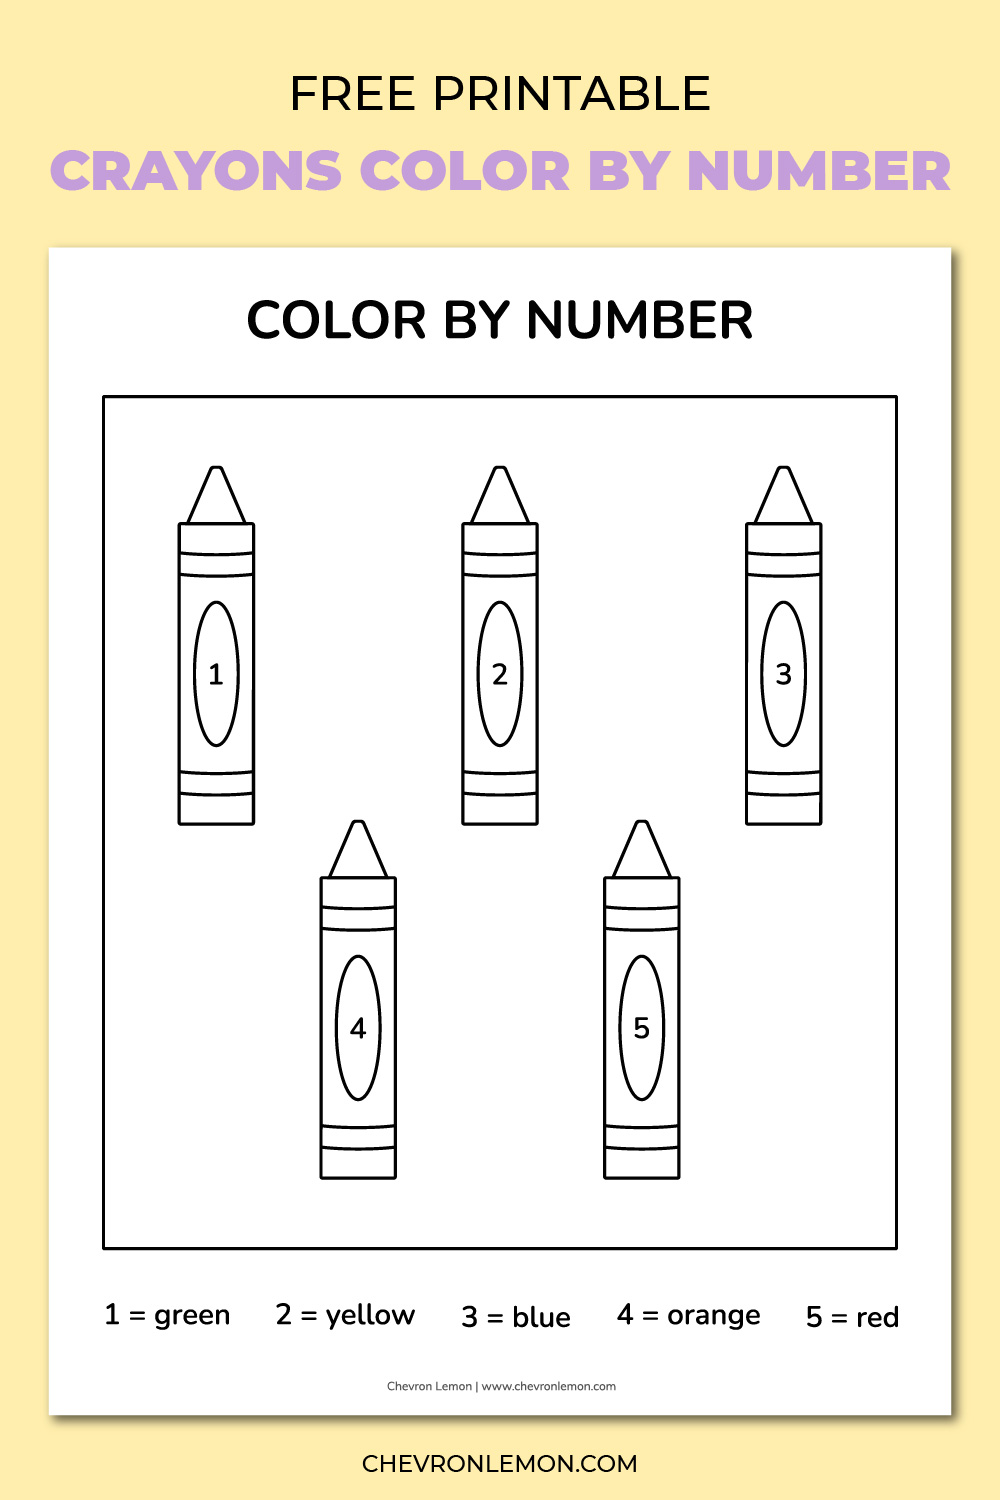 Crayons color by number